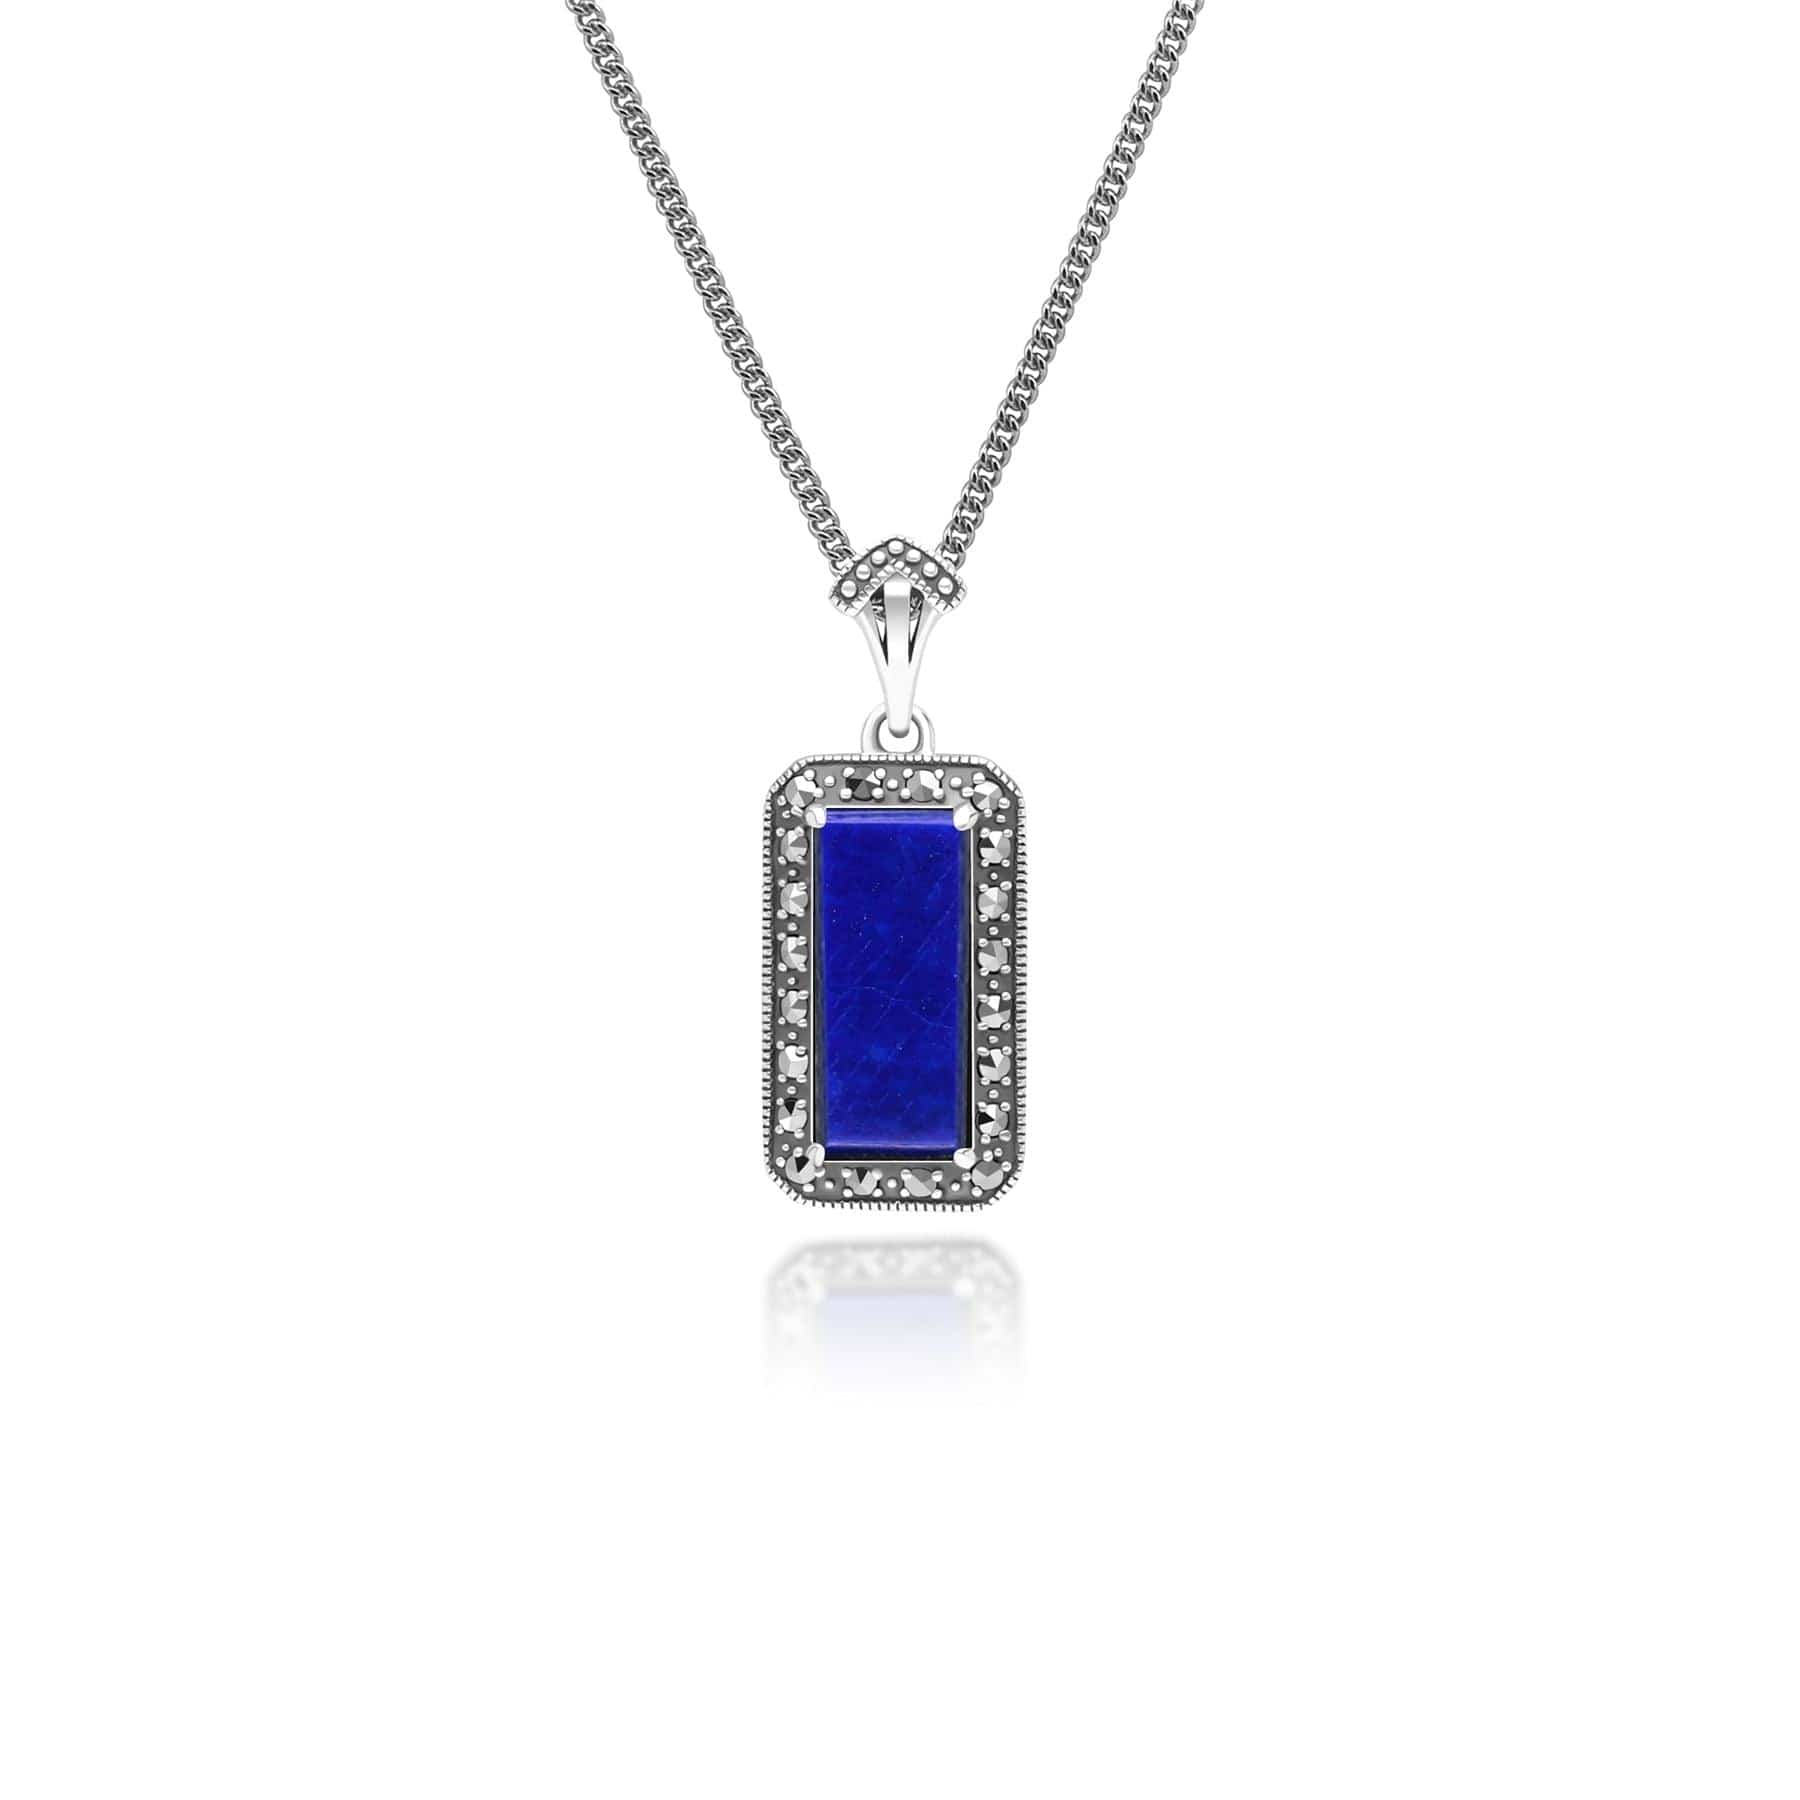 Art Deco Style Octagon Lapis Lazuli and Marcasite Pendant Necklace in Sterling Silver 214P334202925 